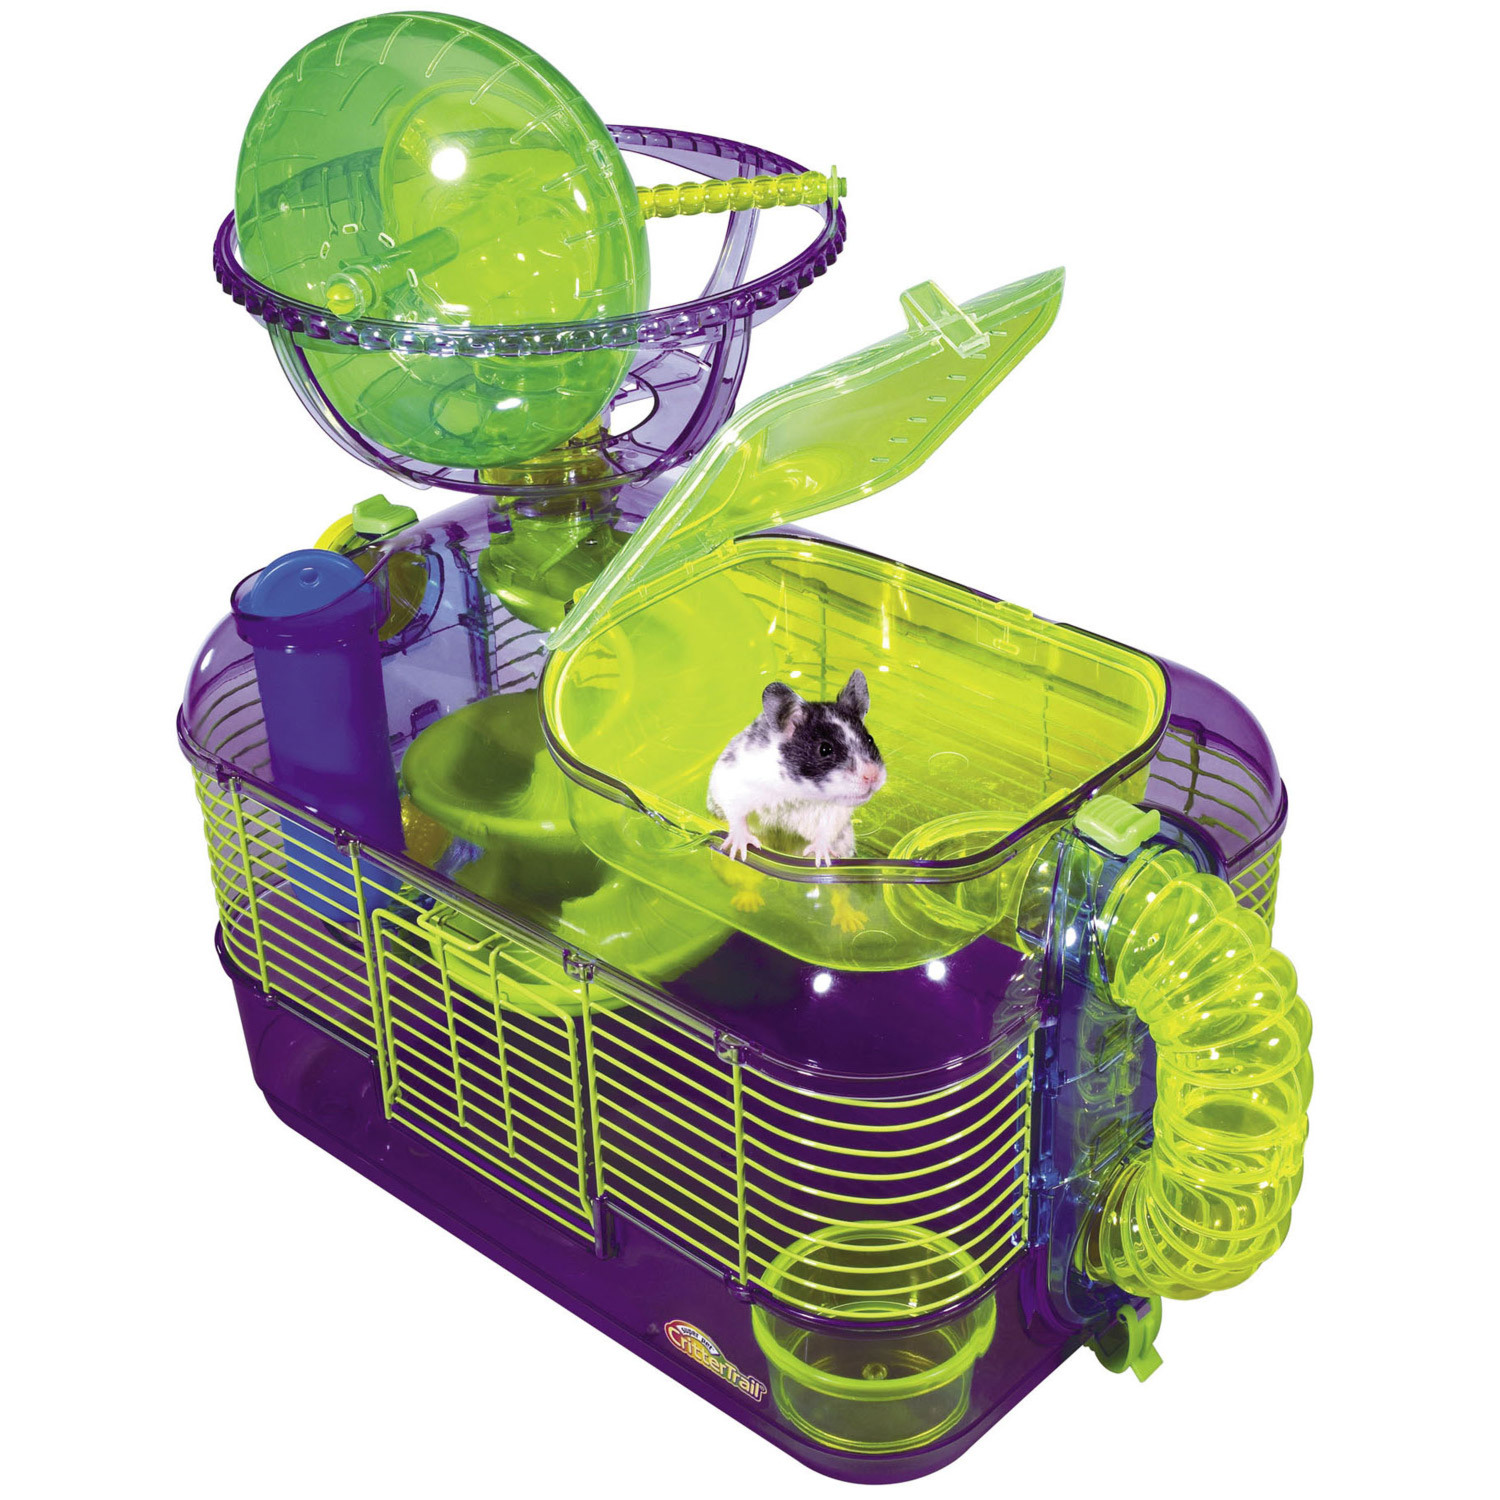 Interpet Kaytee Super Pet Critter Trail and Hamster Cage Image